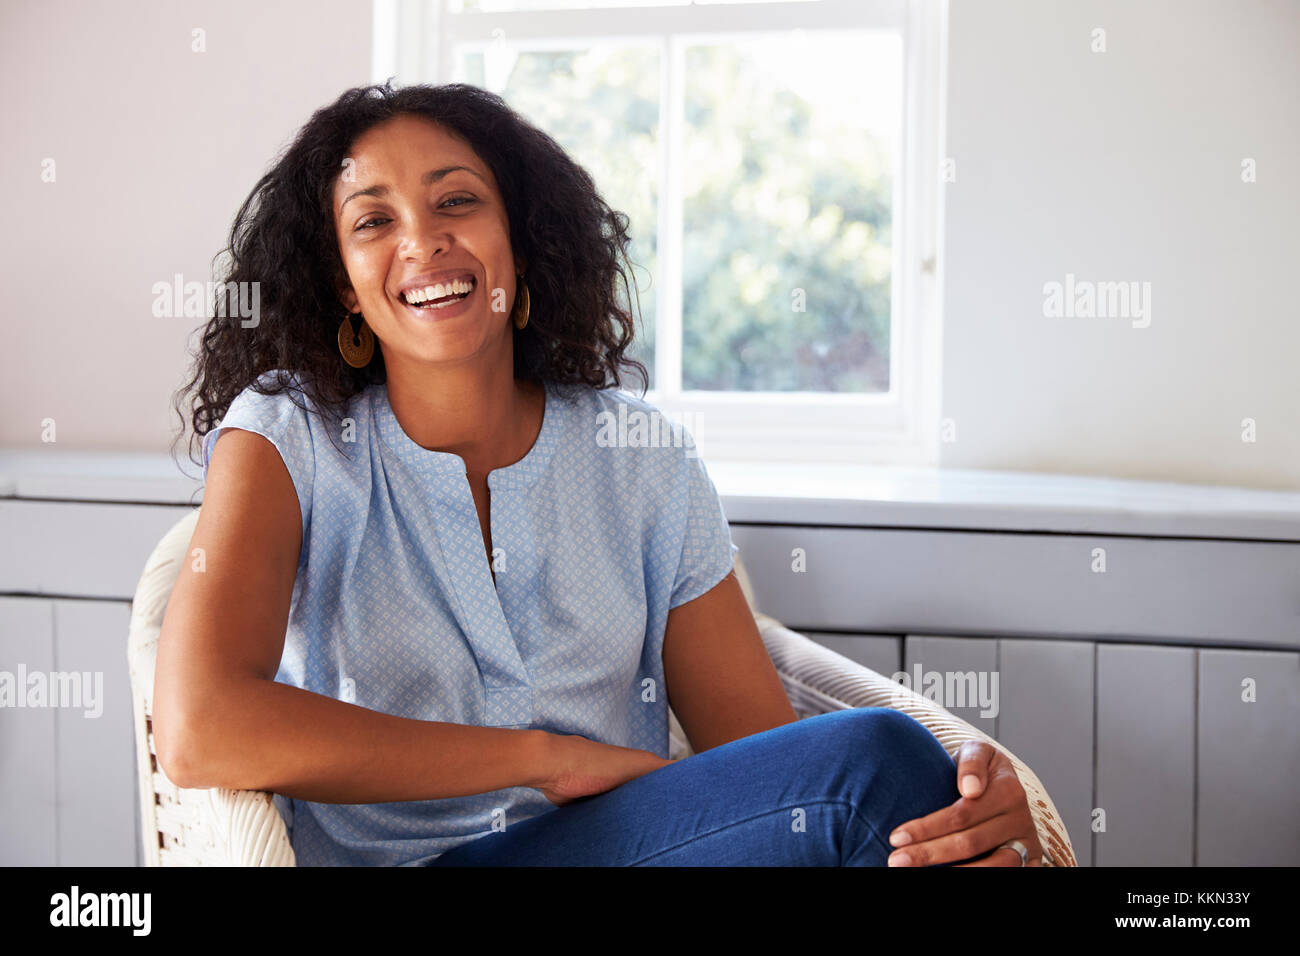 Portrait Of Woman Sitting In Chair At Home Stock Photo